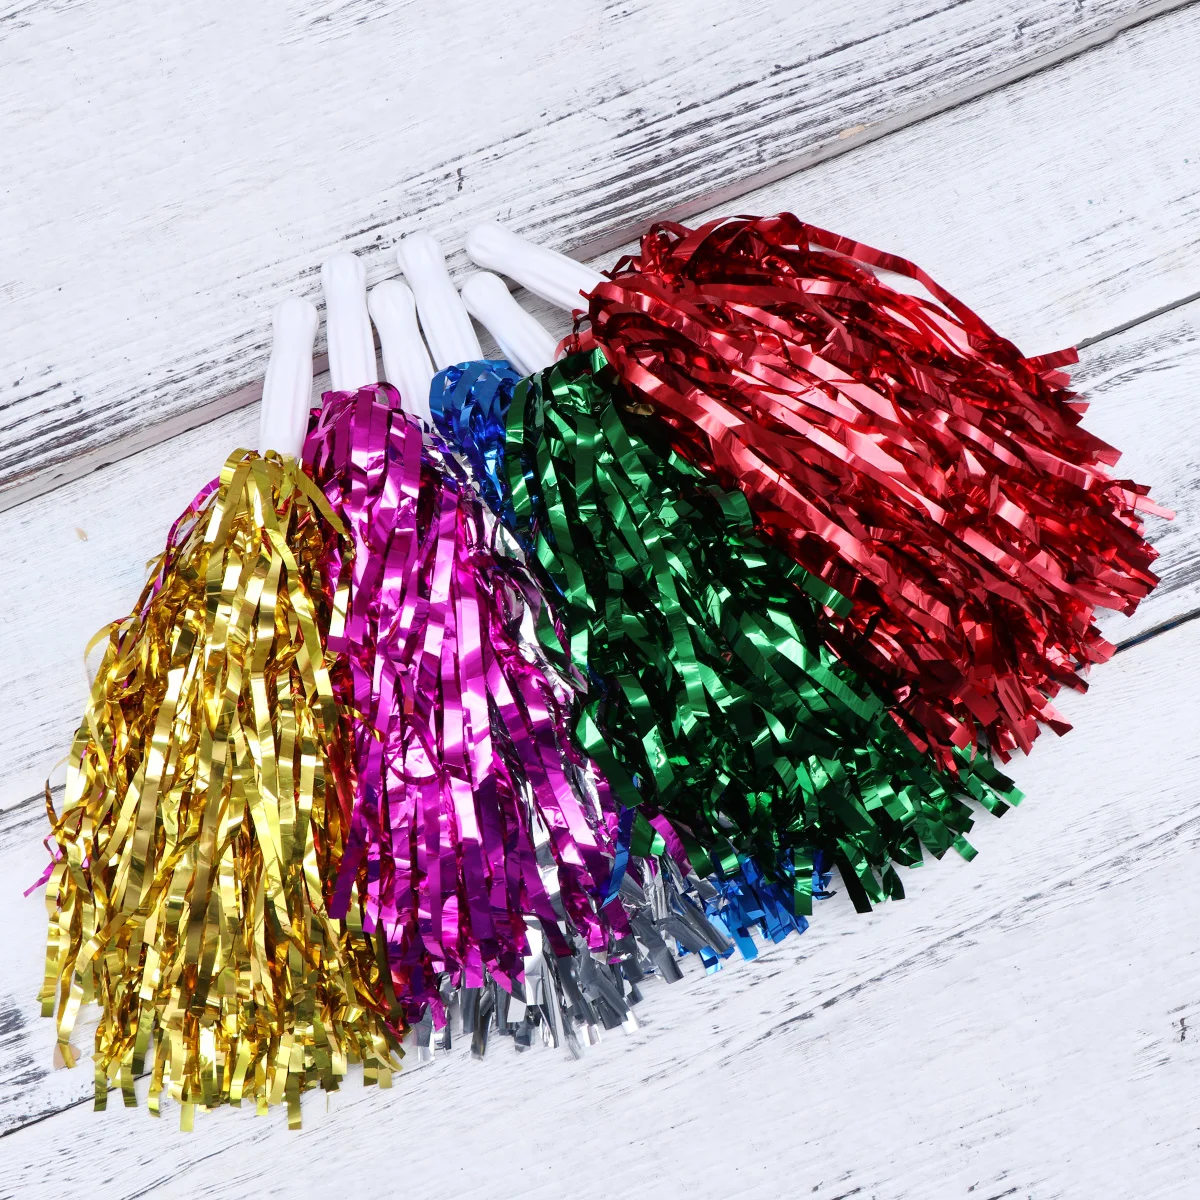 12pcs Straight Handle Cheering Poms Spirited Fun Cheerleading Kit Cheer Props for Performance Competition Cheering Sports Events 6pcs handheld cheering props gymnastics cheer pompom props sports meeting supply